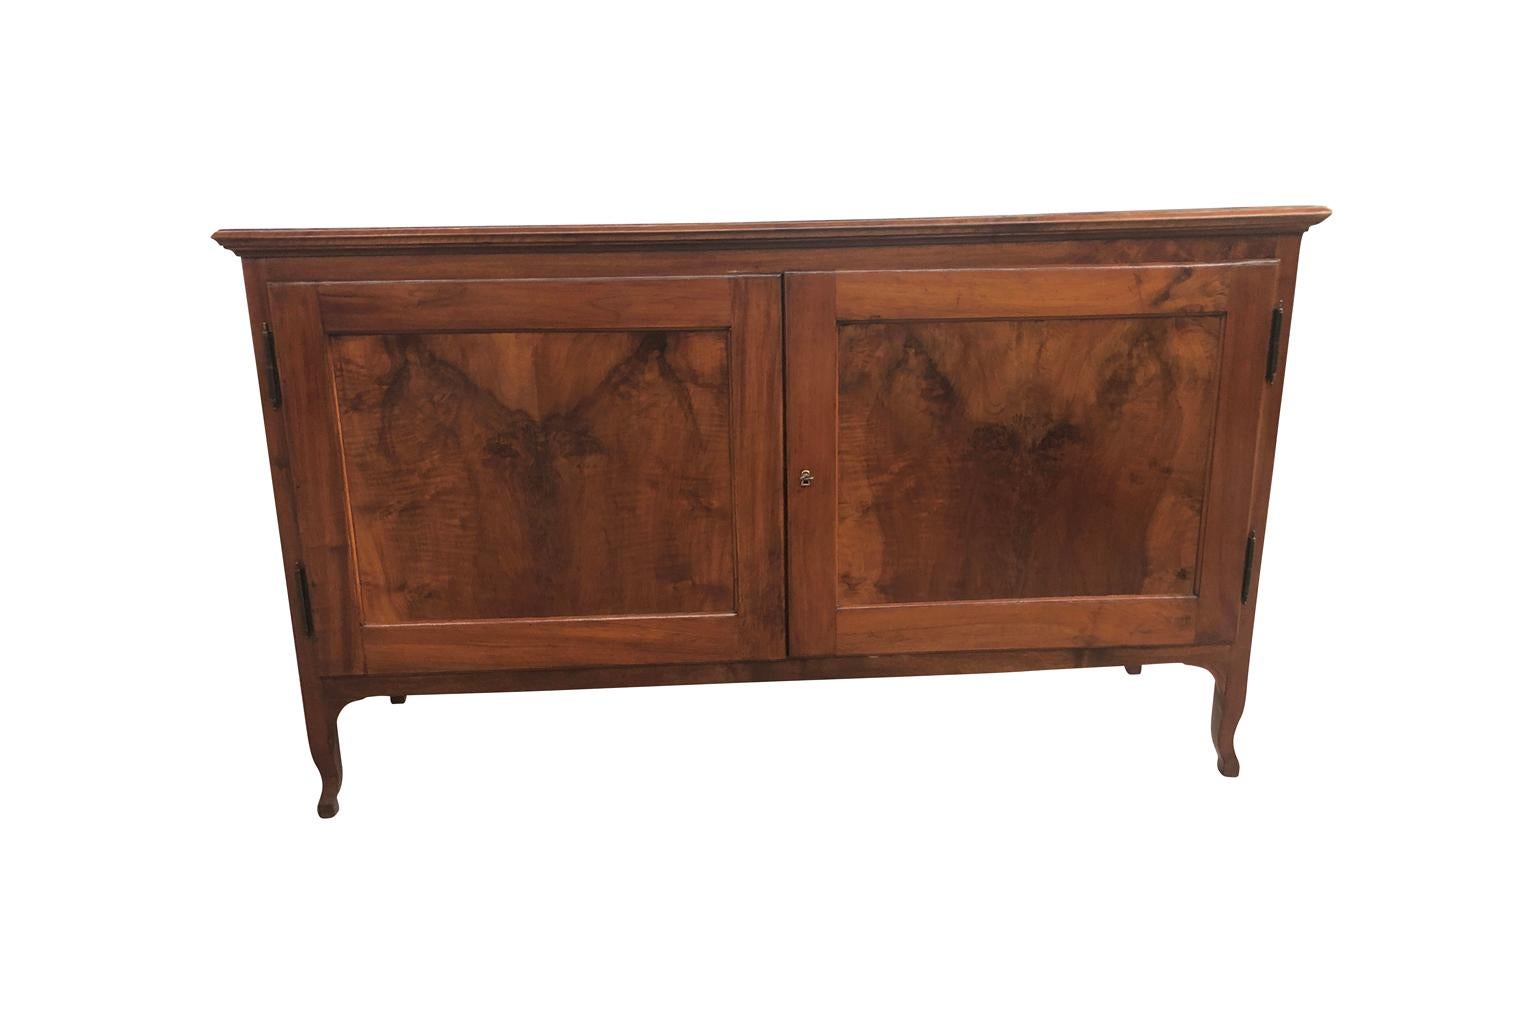 An exceptional and stunning 18th century Venetian credenza in beautiful walnut. Sensational Minimalist lines lend this cabinet a very modern feel. A wonderful storage piece with an interior shelf. Outstanding patina and graining, rich and luminous.